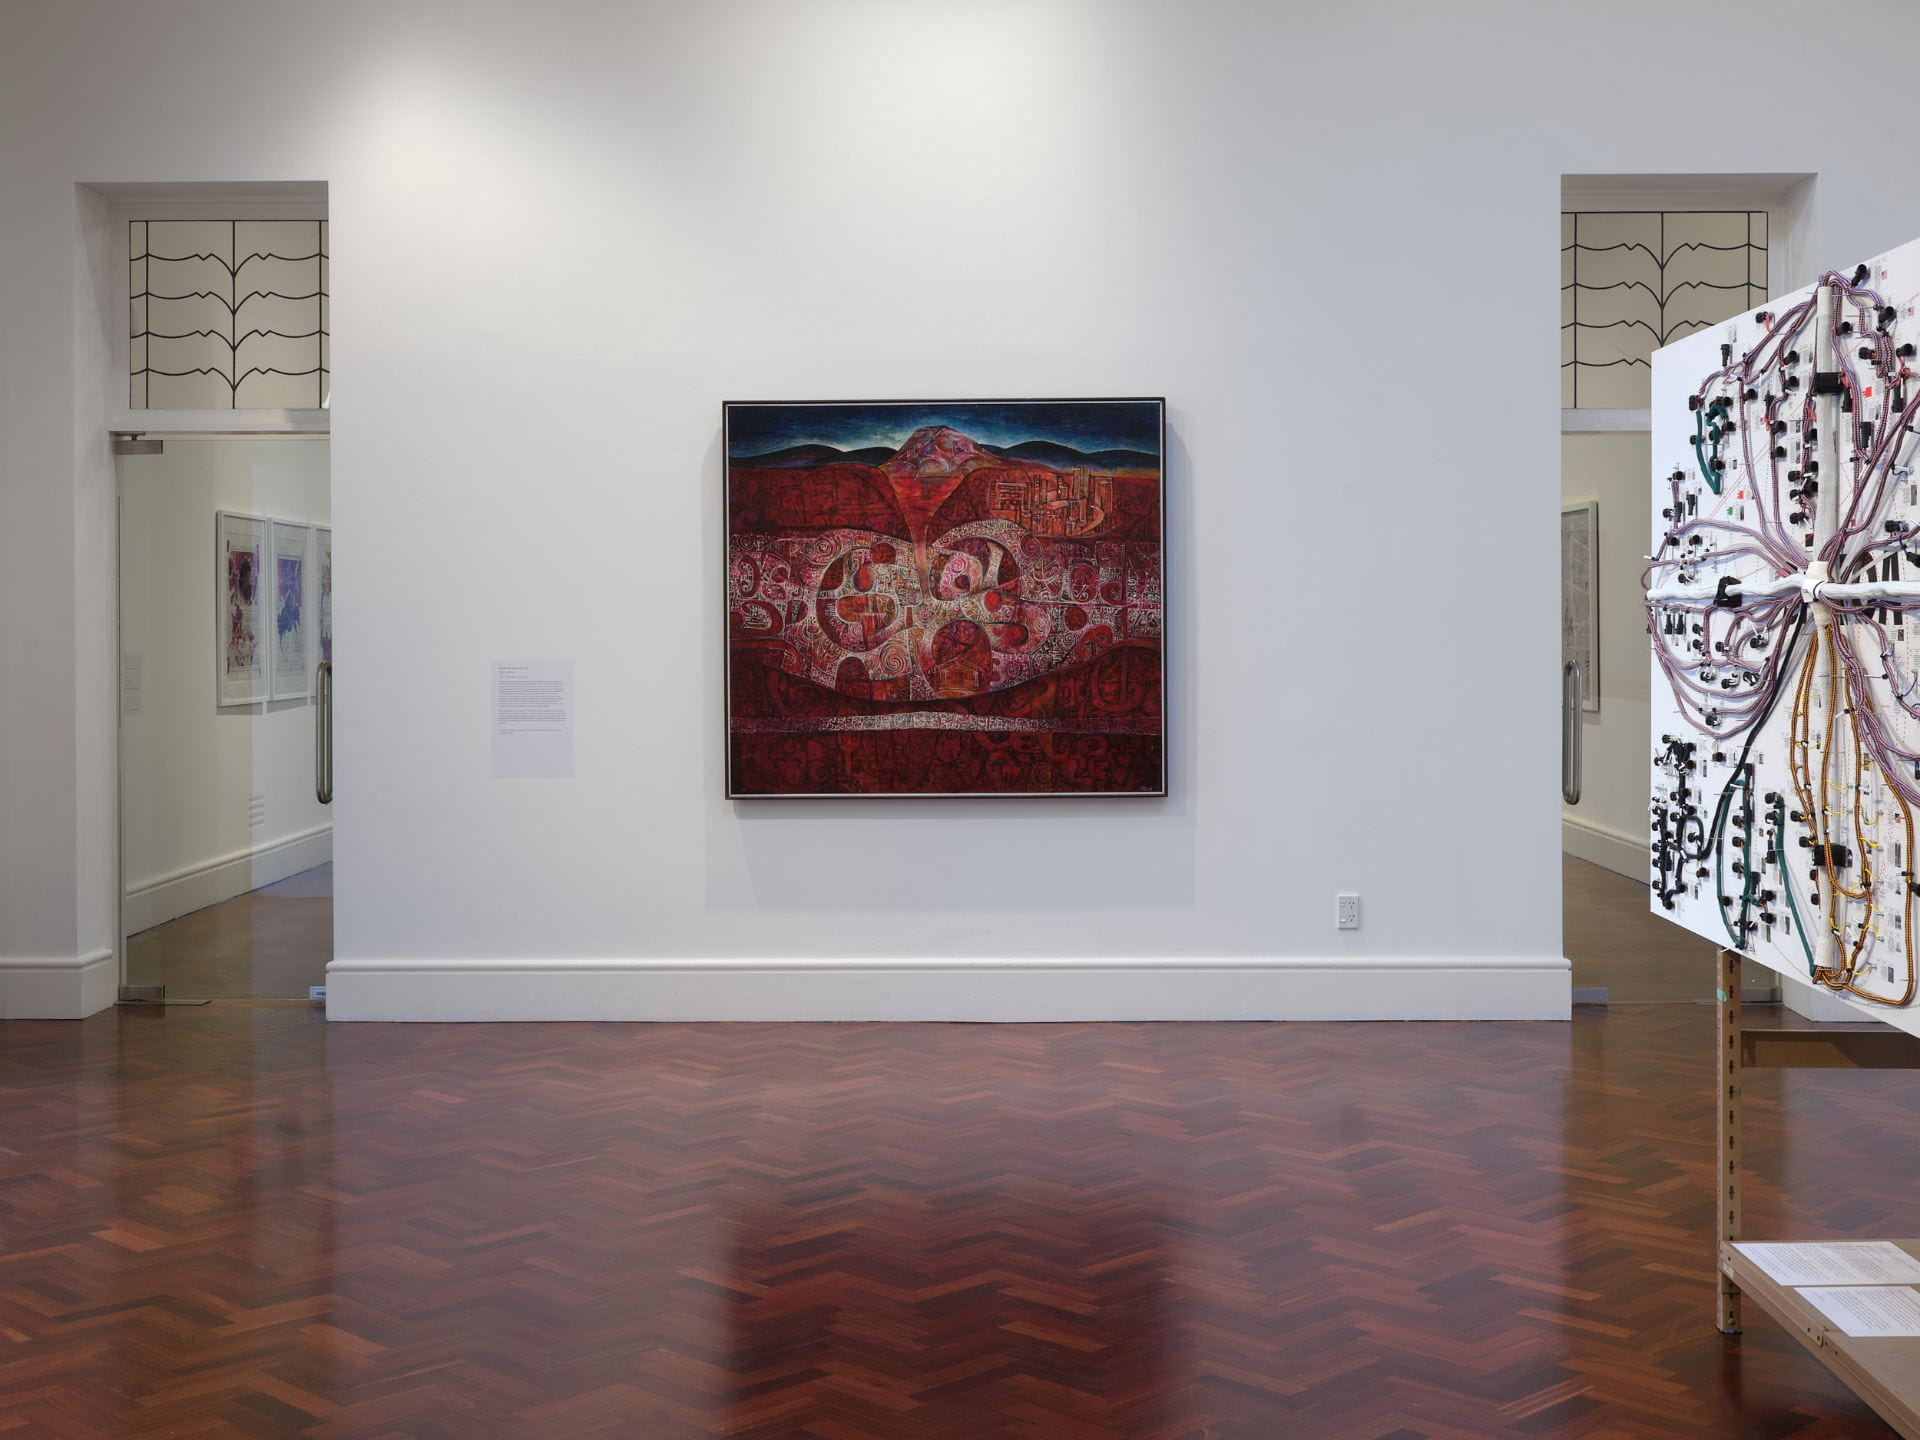 A square painting is hung on a white wall in a large gallery space. The painting depicts a landscape filled with mountains, showing the depths of the earth below. The earth is filled with stylised patterns drawn from Maori kowhaiwhai.